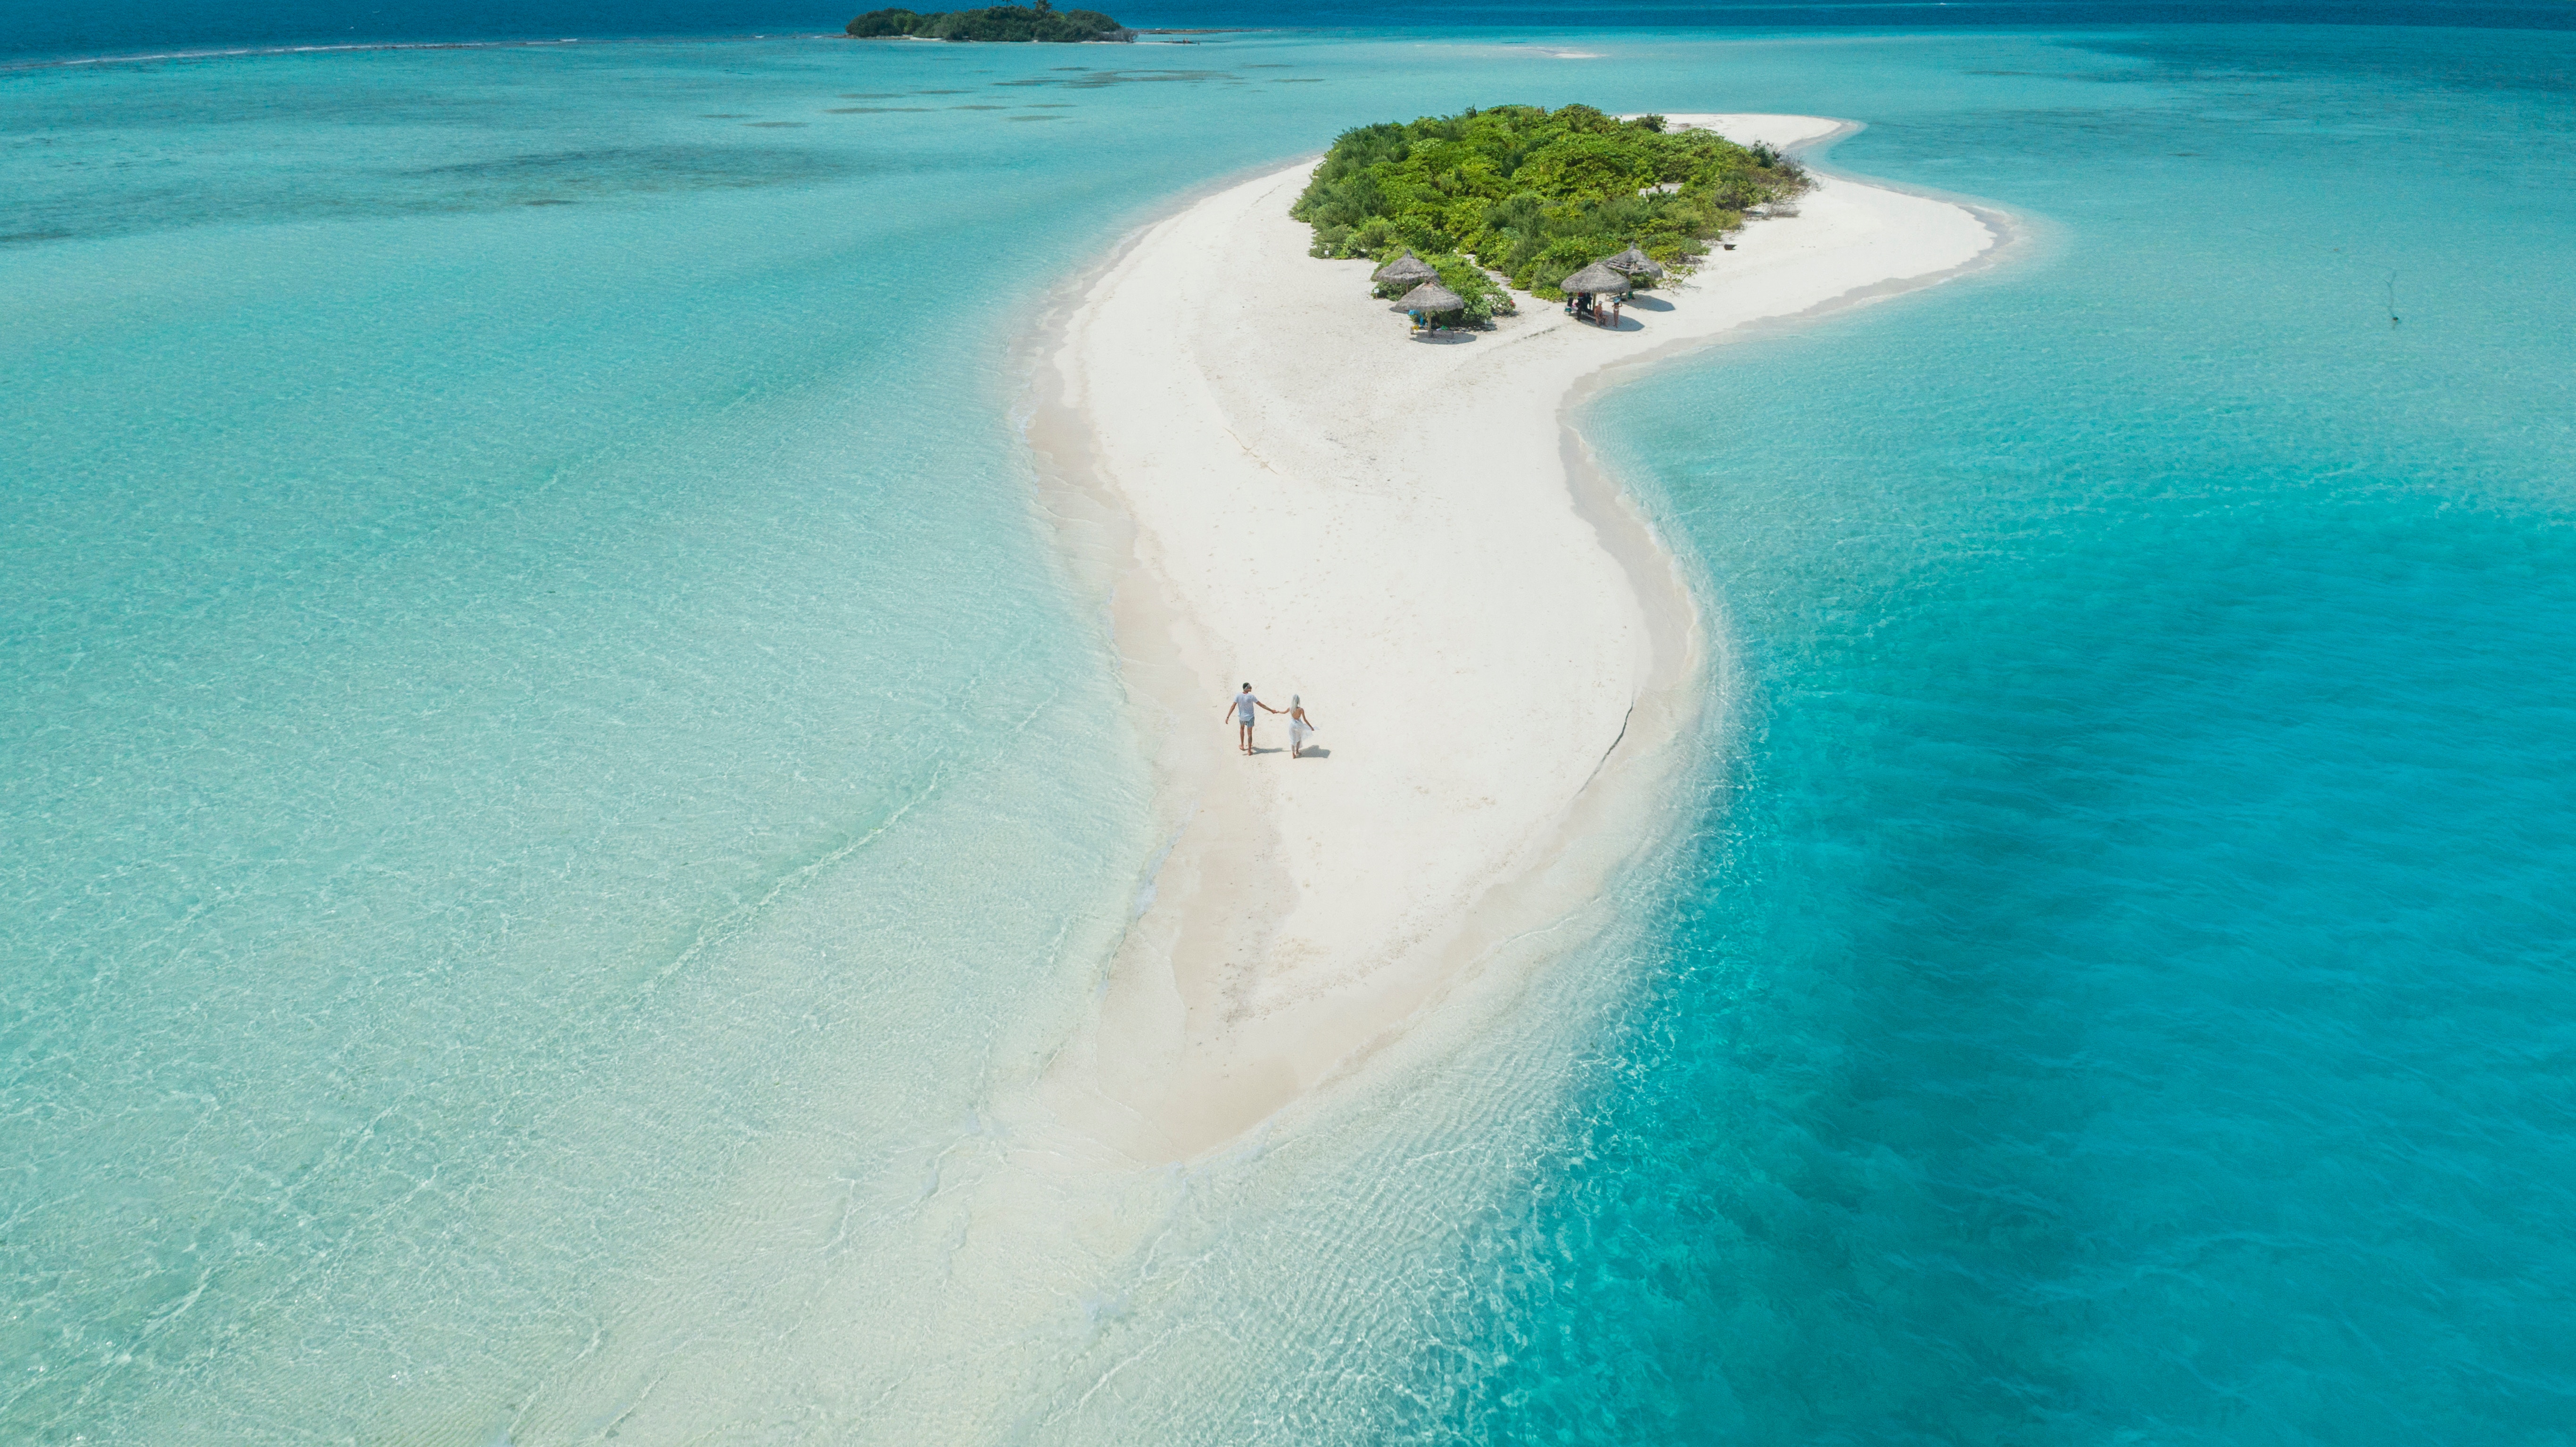 Aerial shot of two people walking on a tiny Caribbean island surrounded by teal water